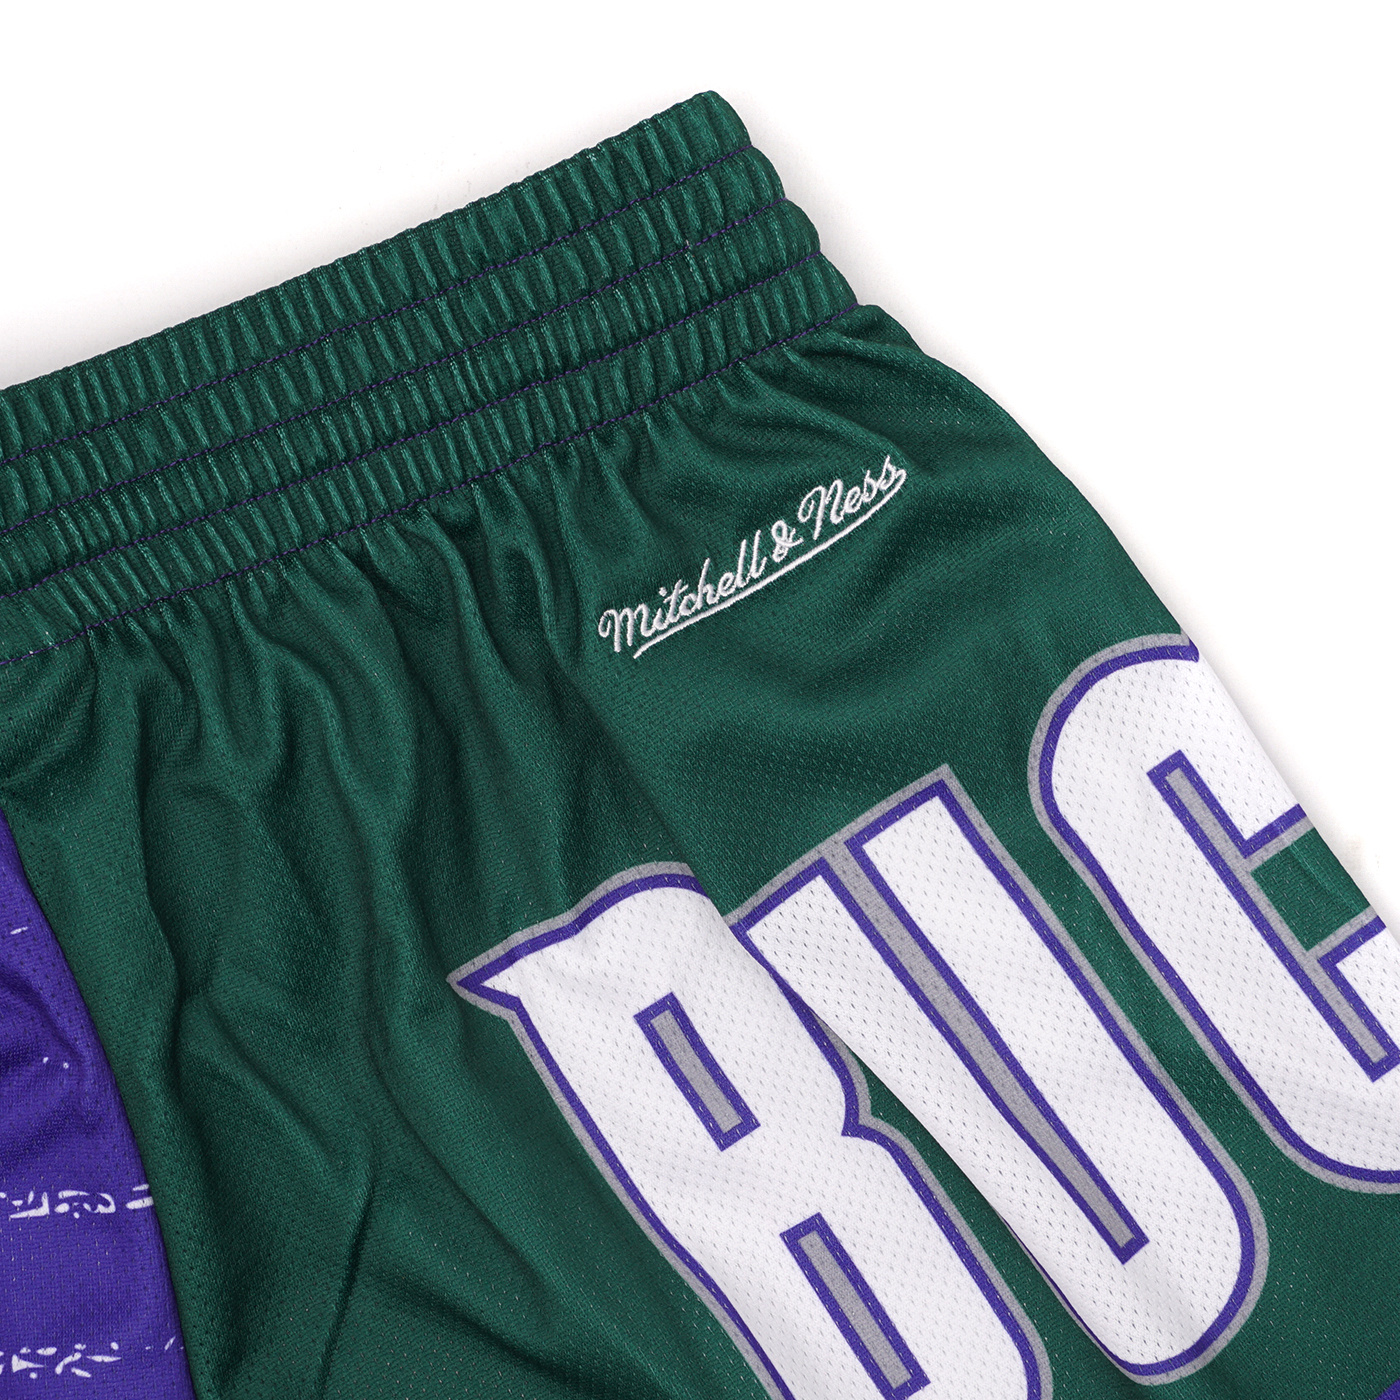 Mitchell and Ness Brewers Jumbotron 2.0 Shorts